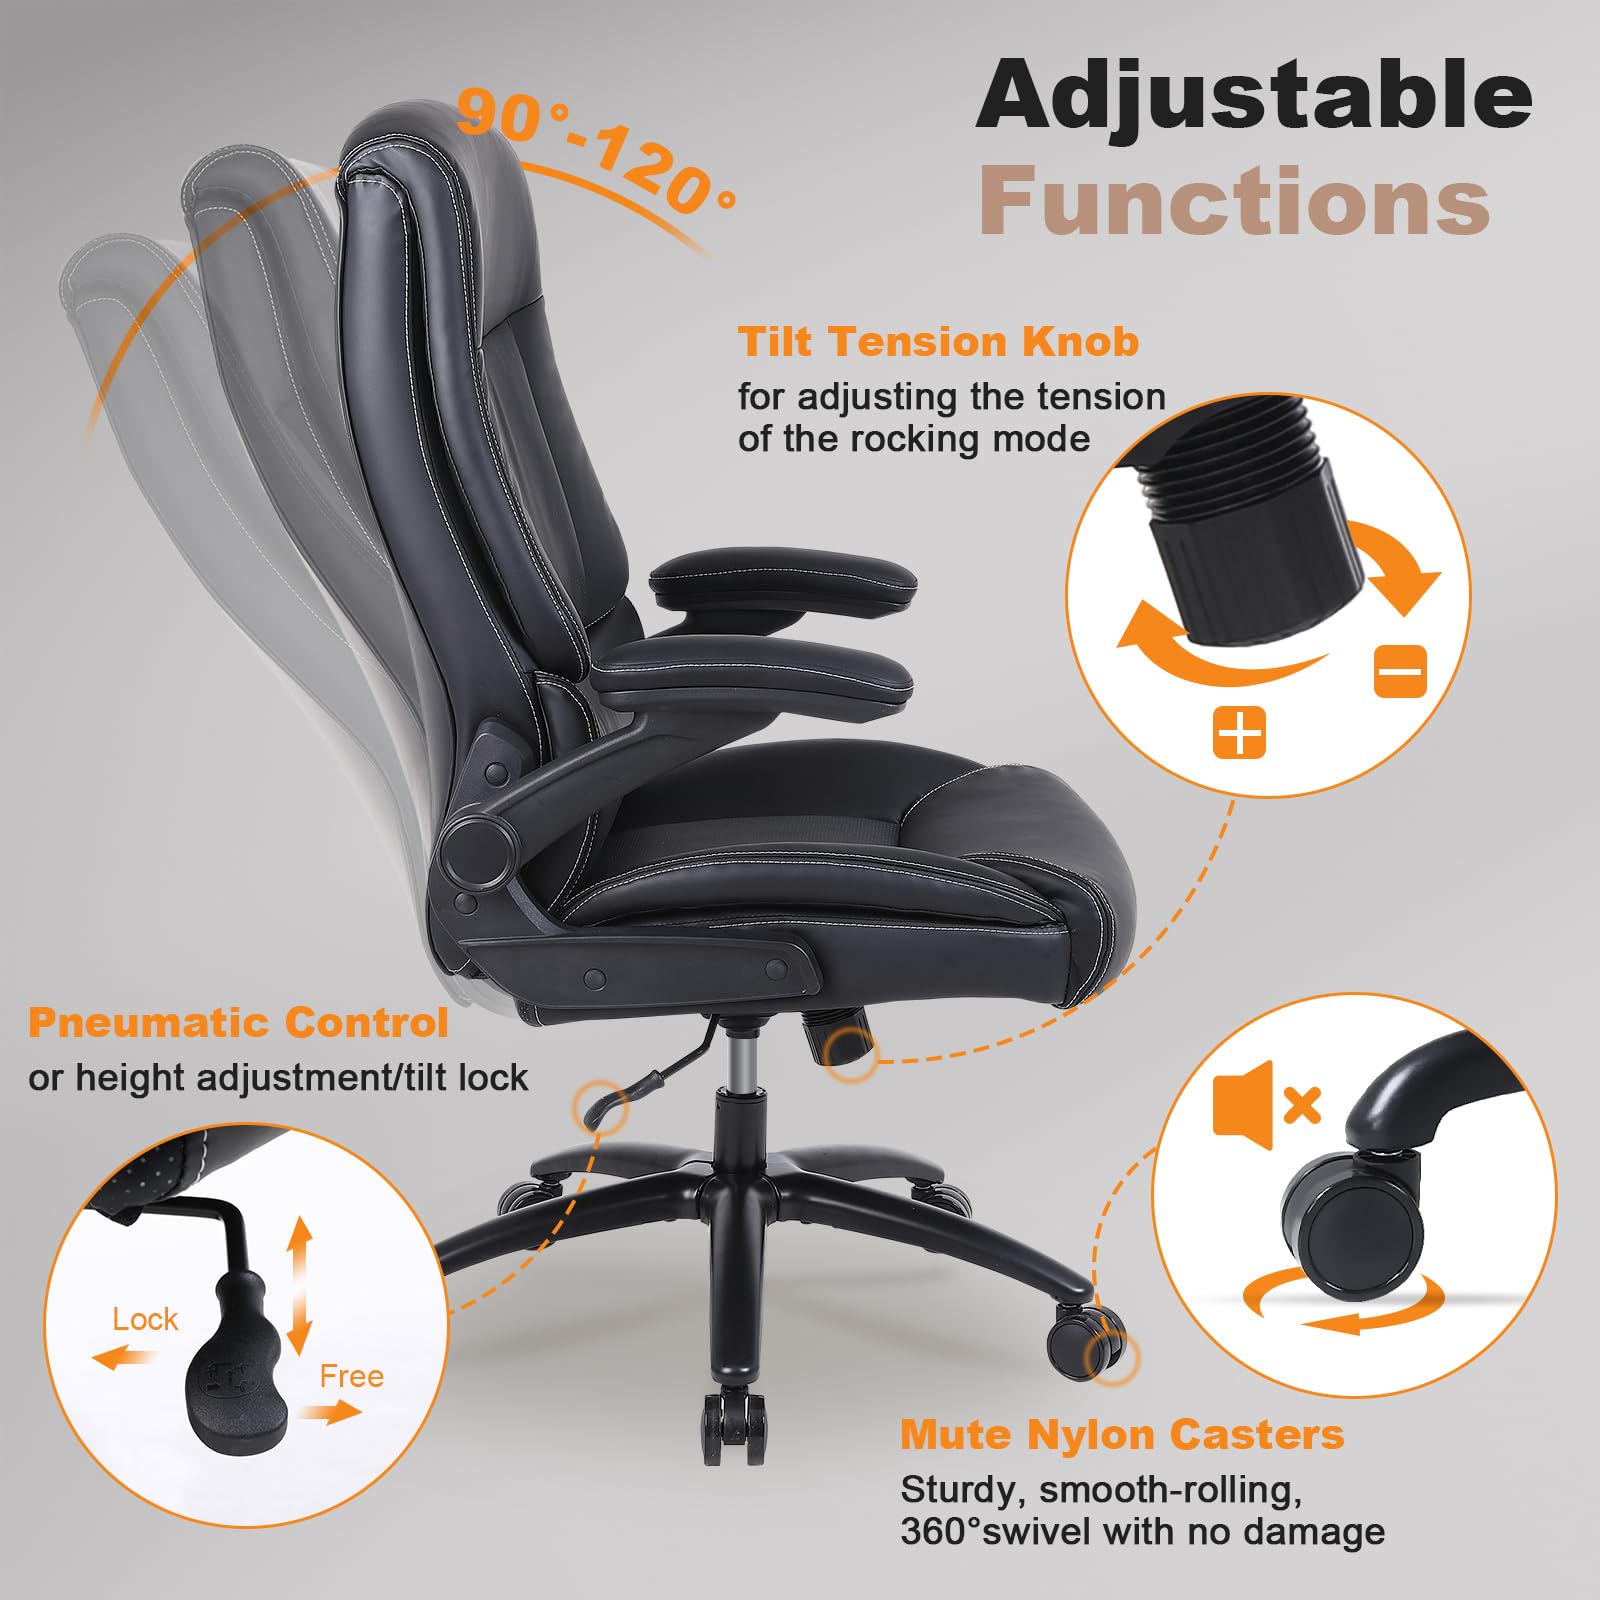 Youhauchair Big and Tall Office Chair, 500LBS Executive Desk Chair with Lumbar Support, PU Leather Ergonomic Computer Chair with Flip-up Armrests, High Back Work Chair, Black